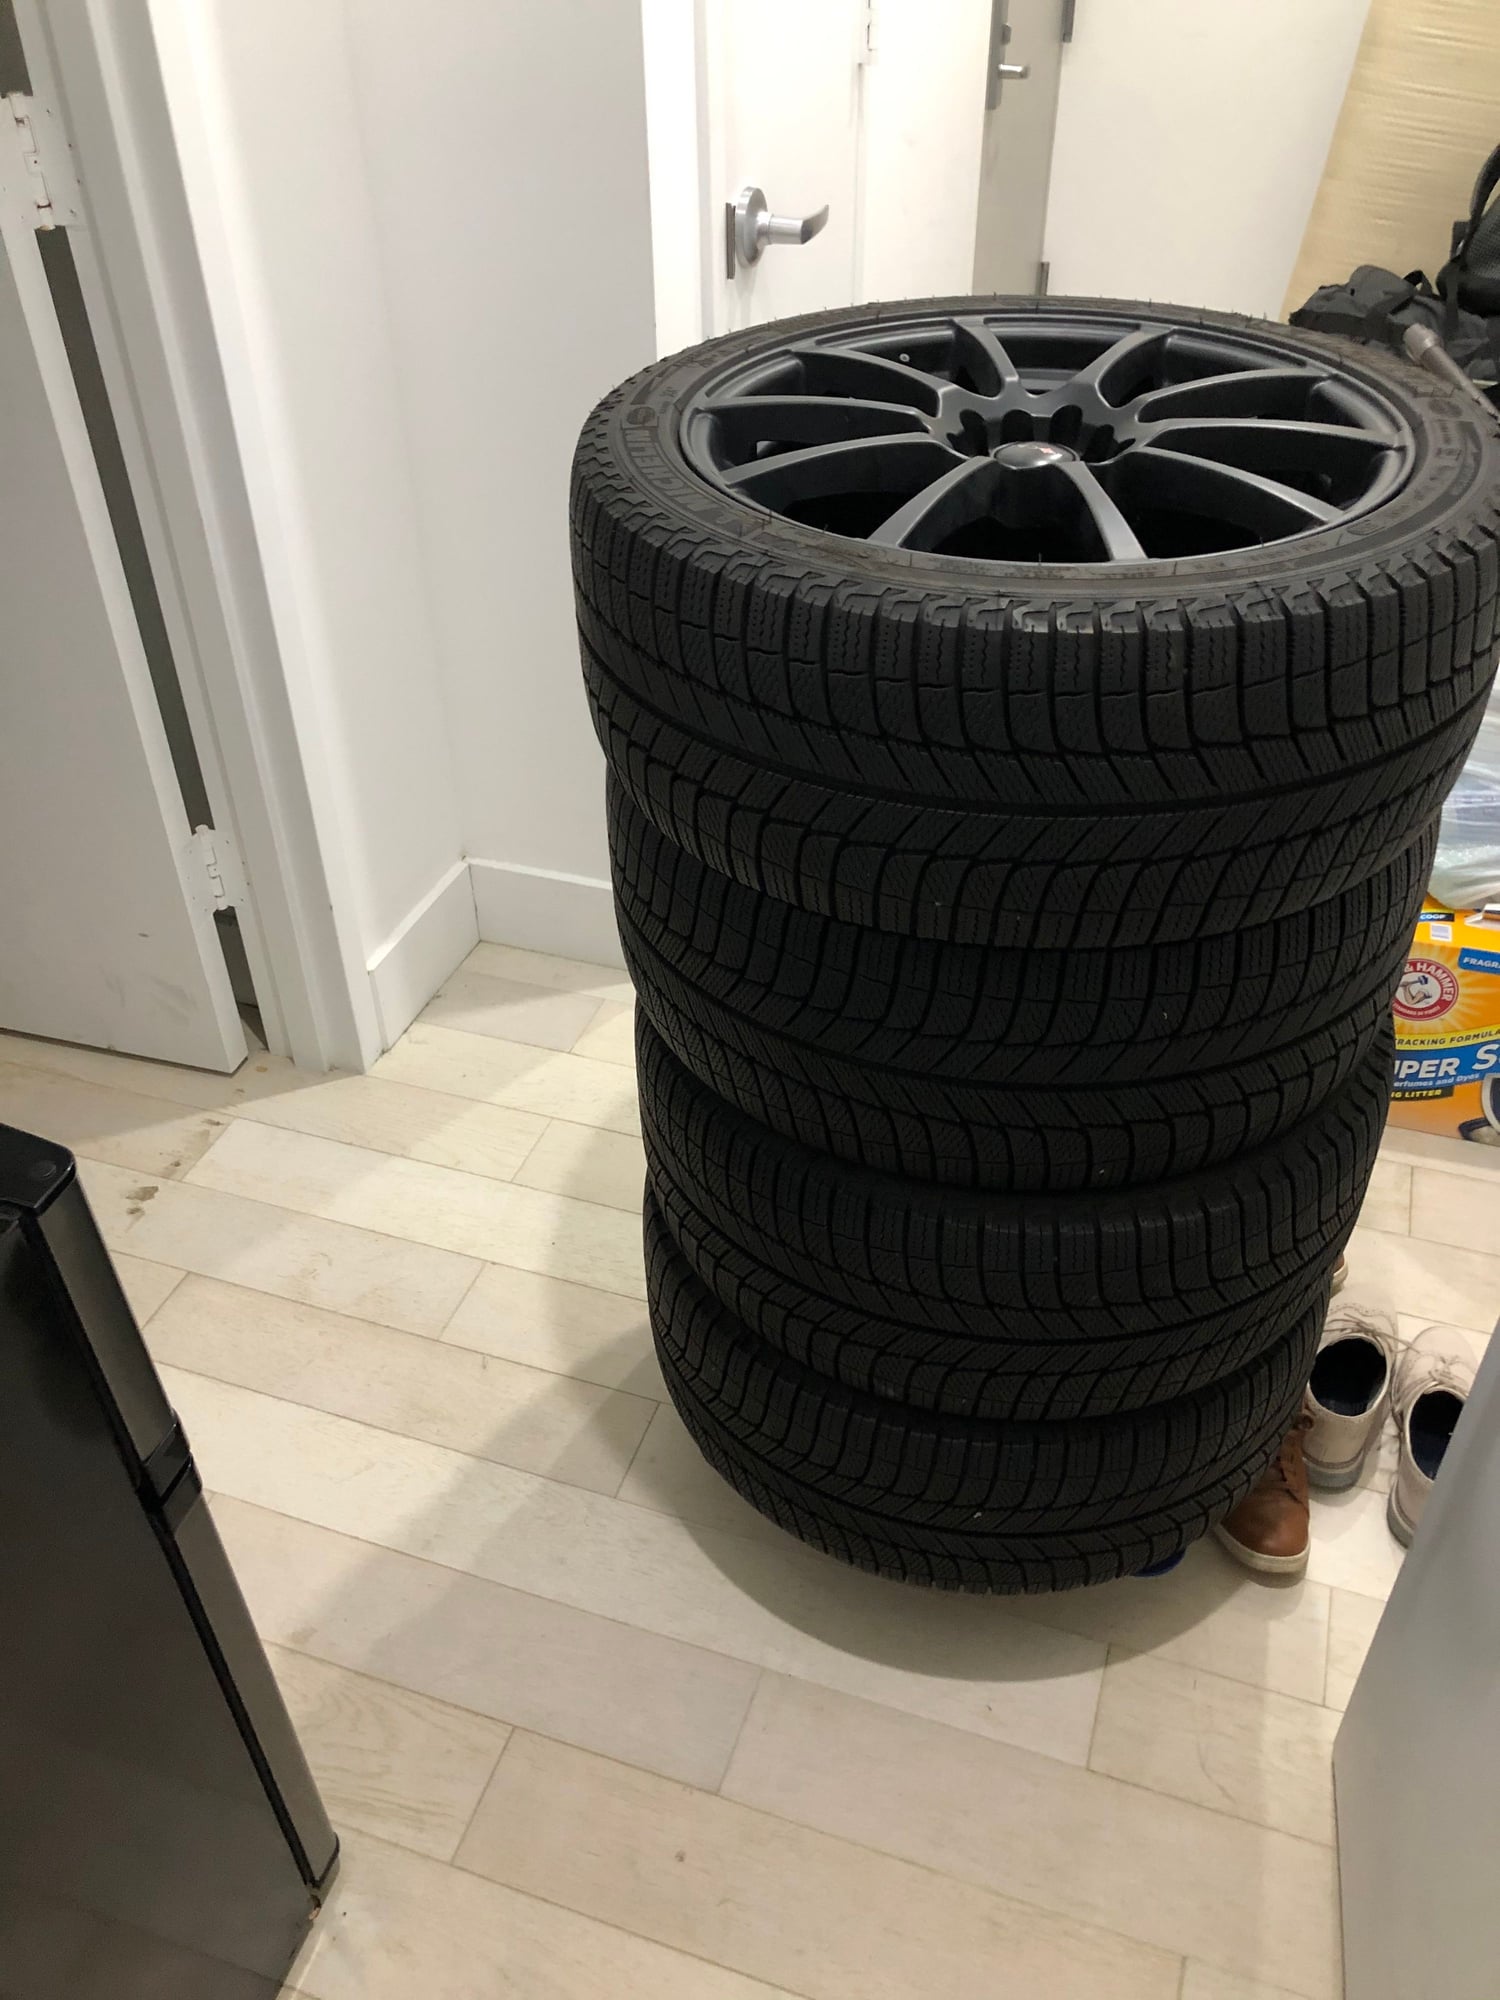 Wheels and Tires/Axles - Winter tire set. Michelin X-Ice Snow tires 245/40/R18 and Focal 18 inch rim. - Used - 0  All Models - Hartford, CT 06103, United States